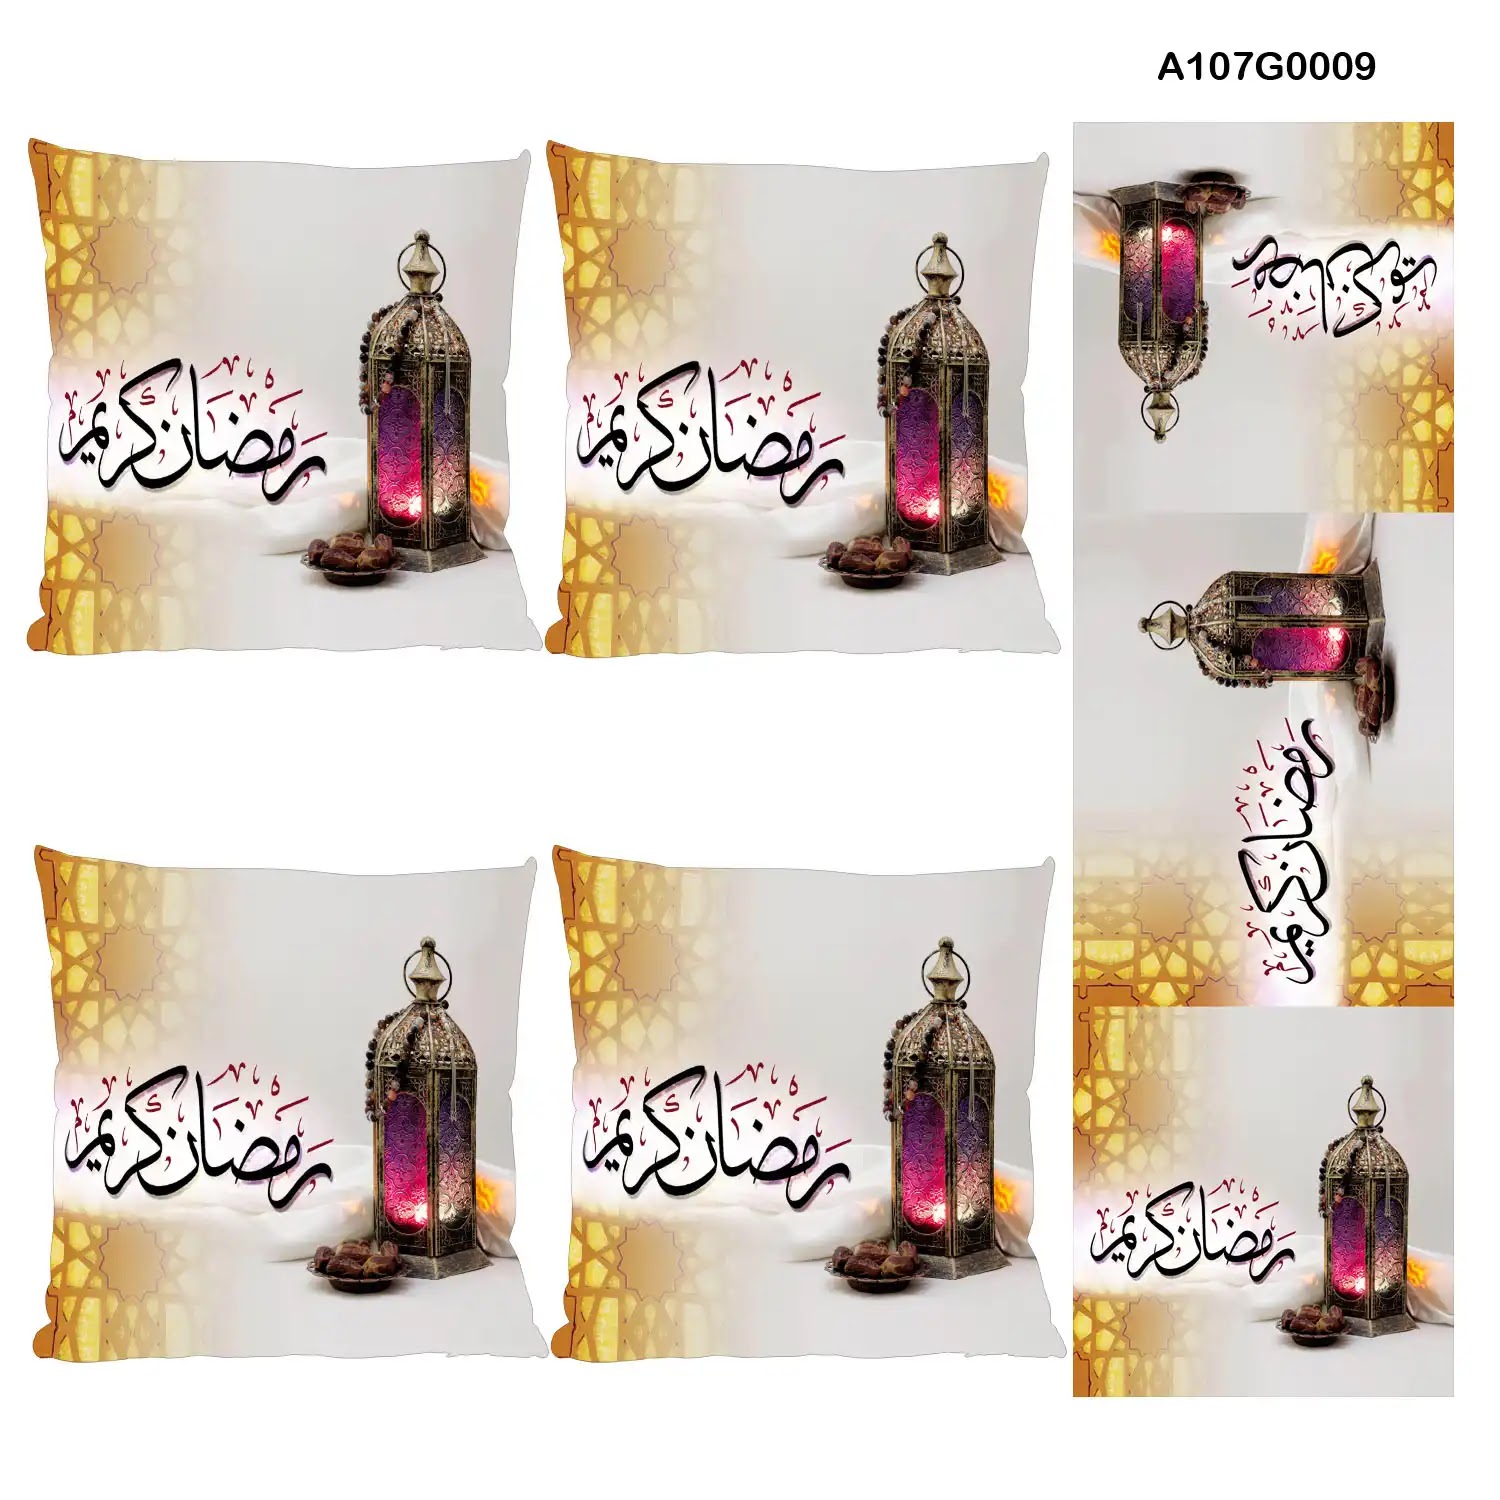 White Pillow cover set & table runner with Ramadan lantern drawing